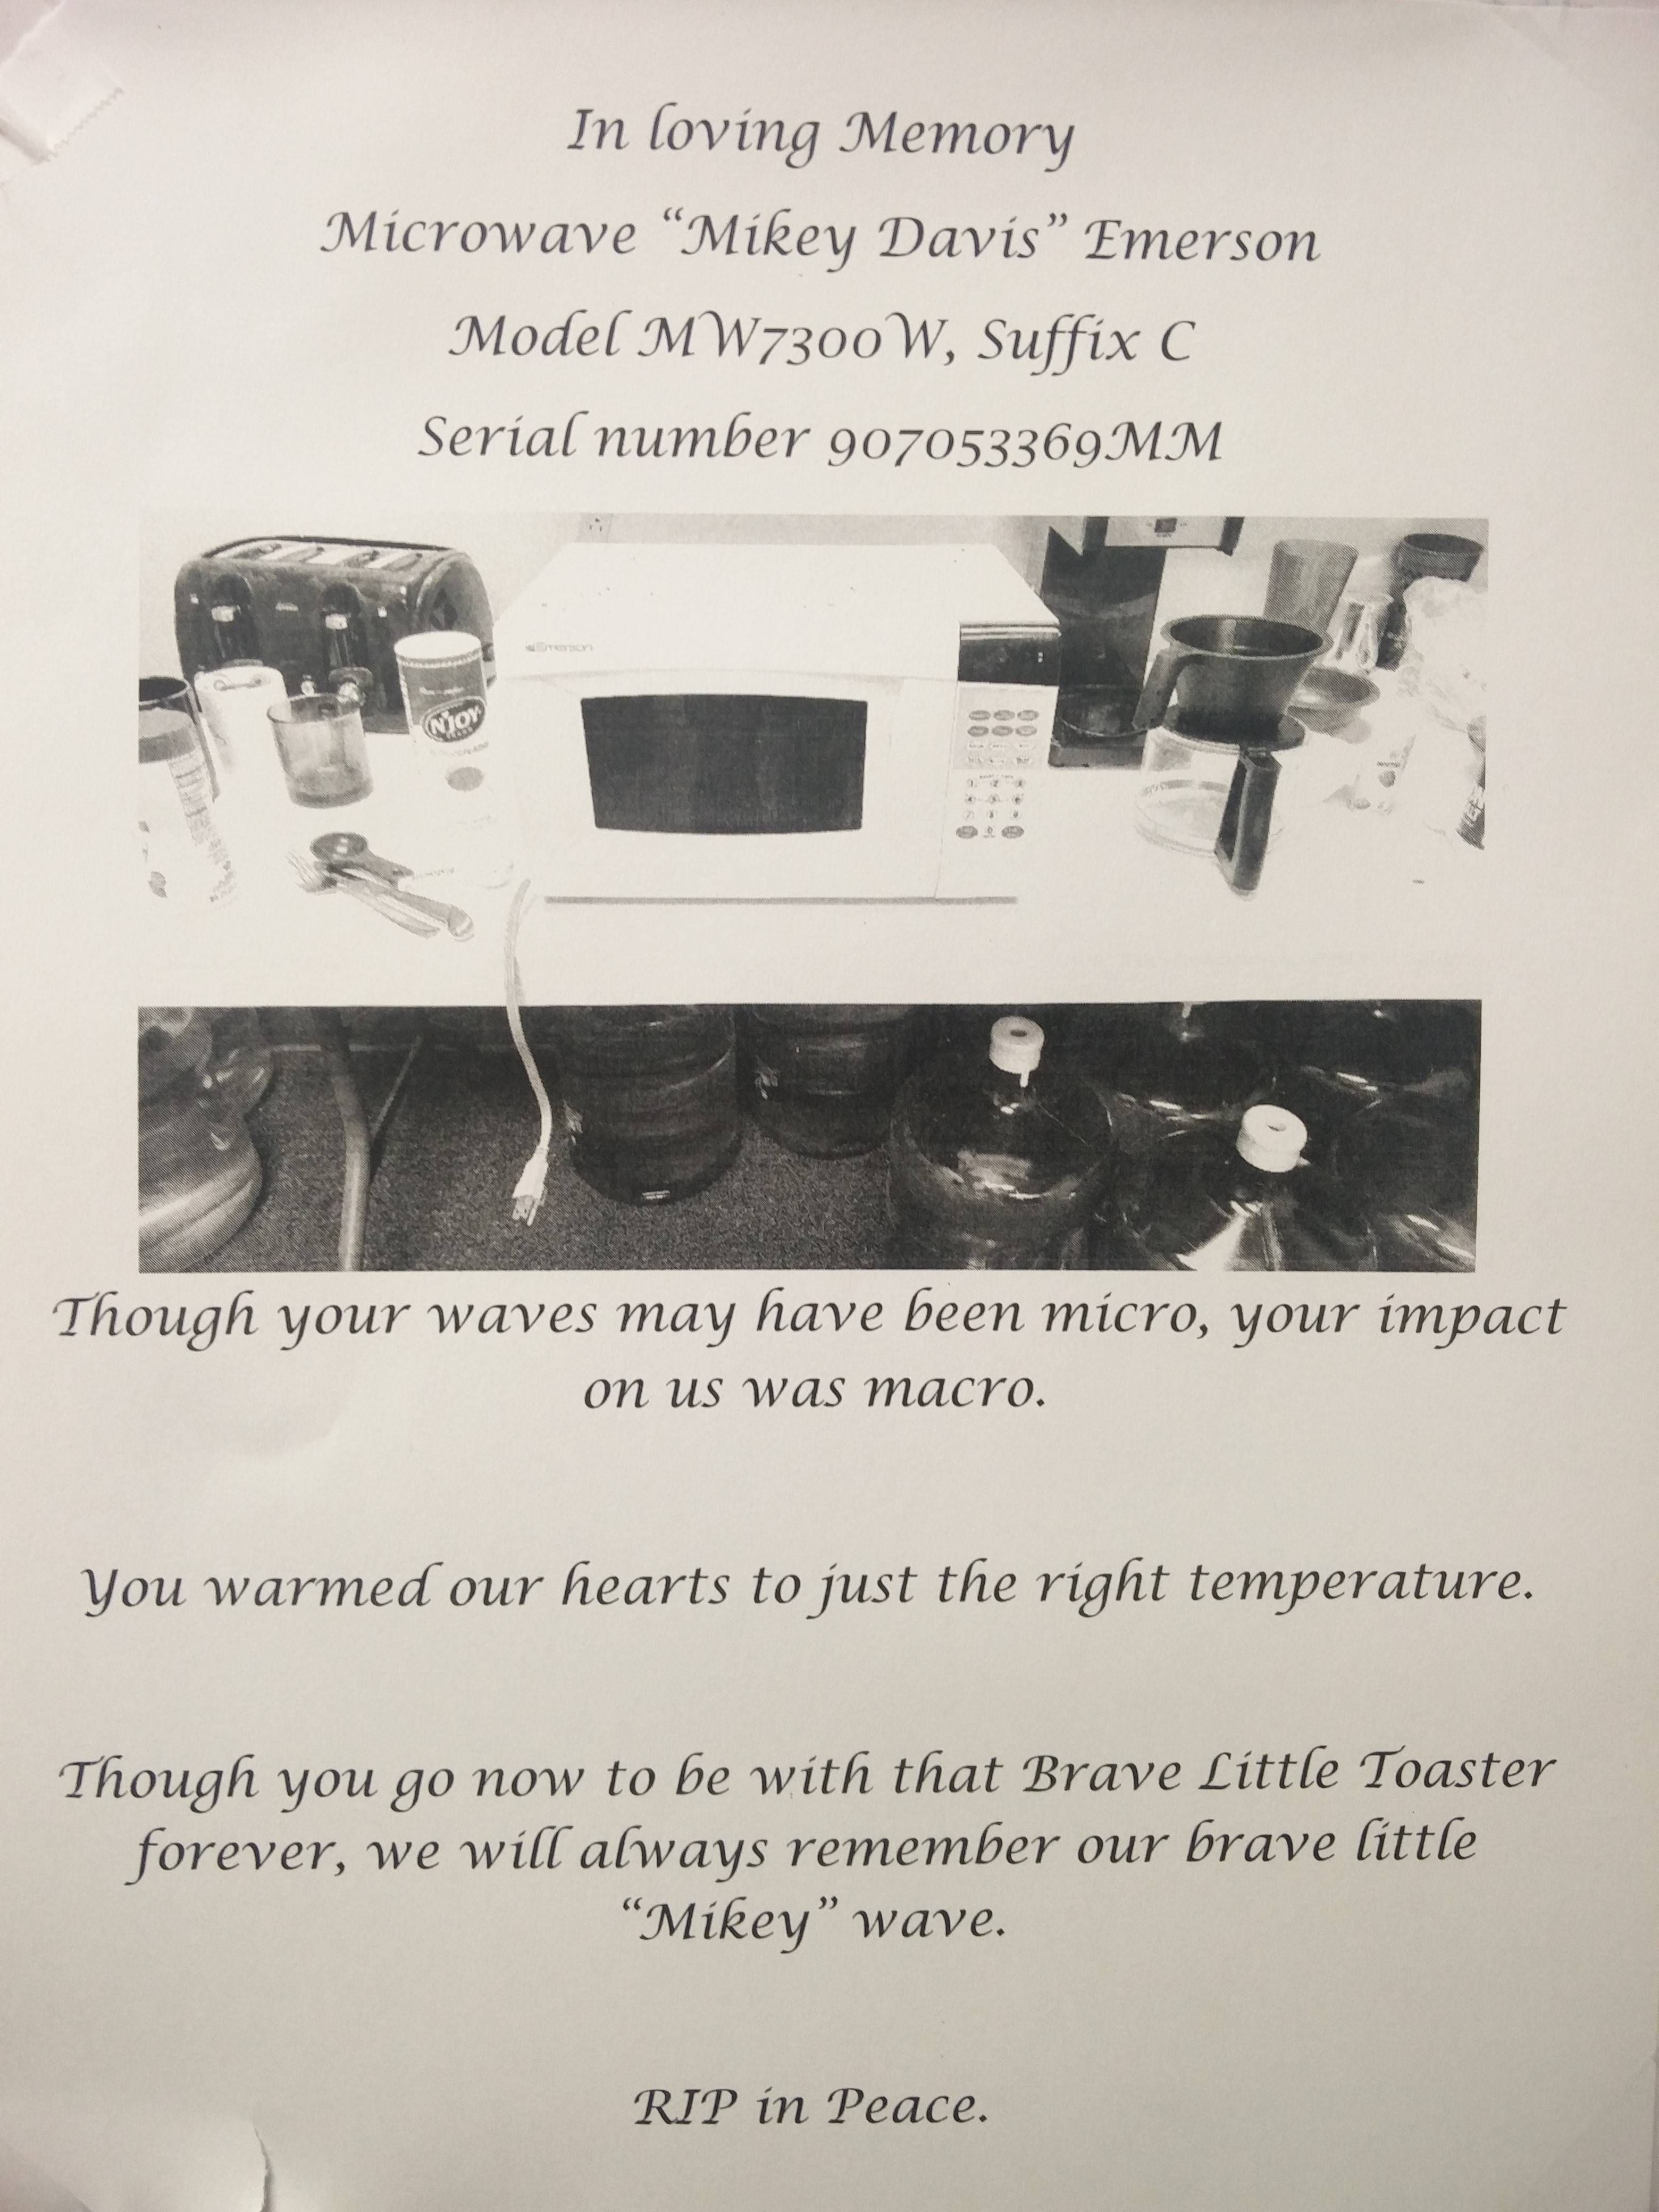 The microwave at work died. Someone took the time write an obituary.